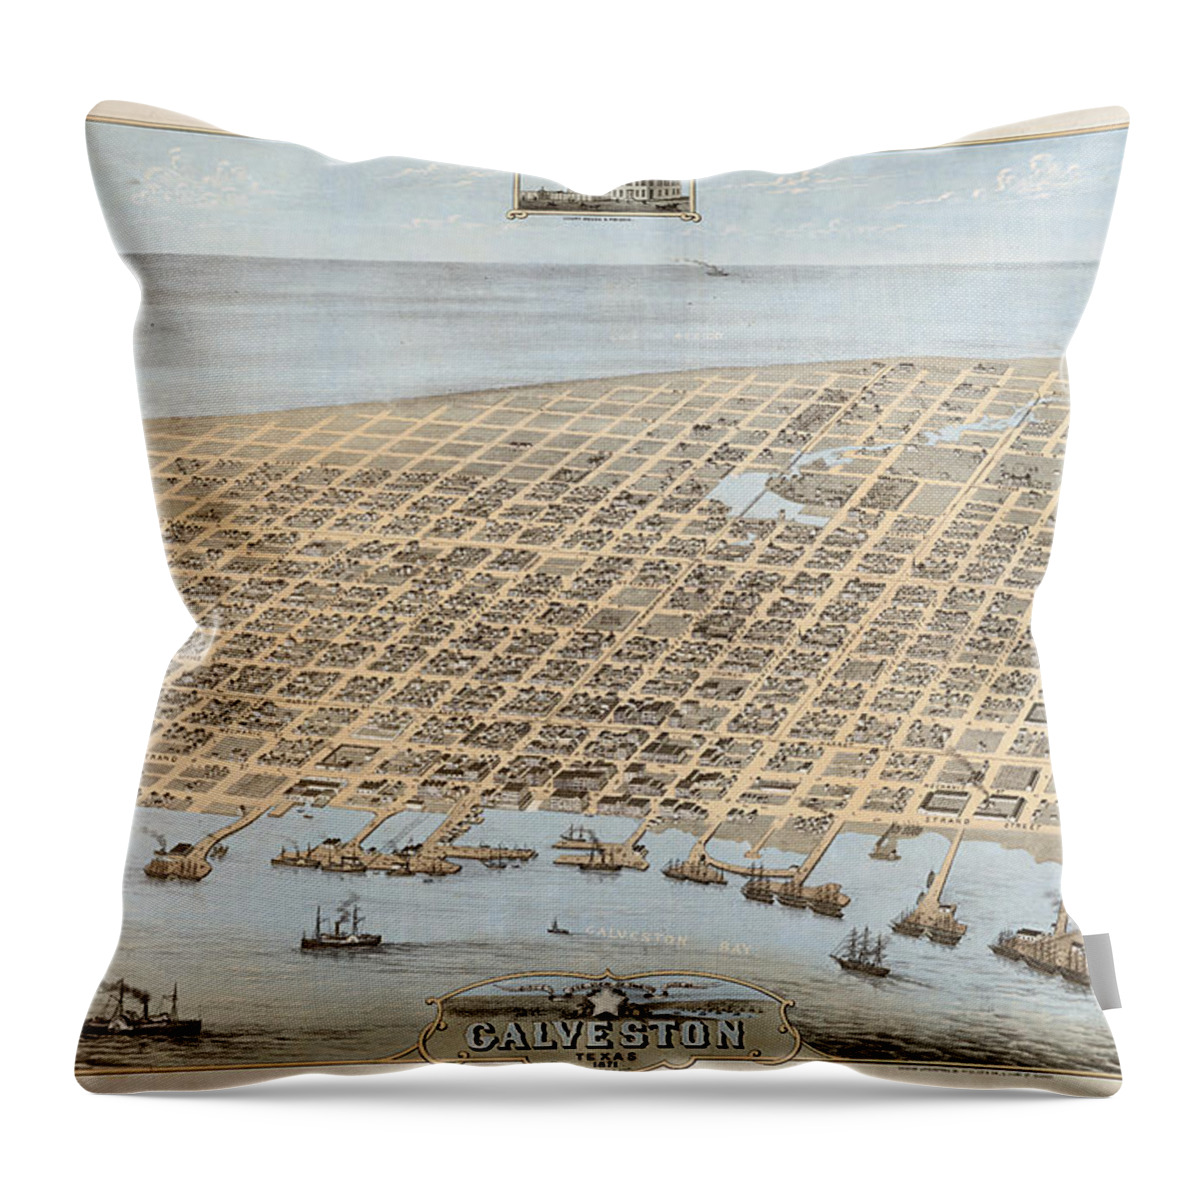 Texas Throw Pillow featuring the digital art Galveston 1871 by Camille Drie by Texas Map Store